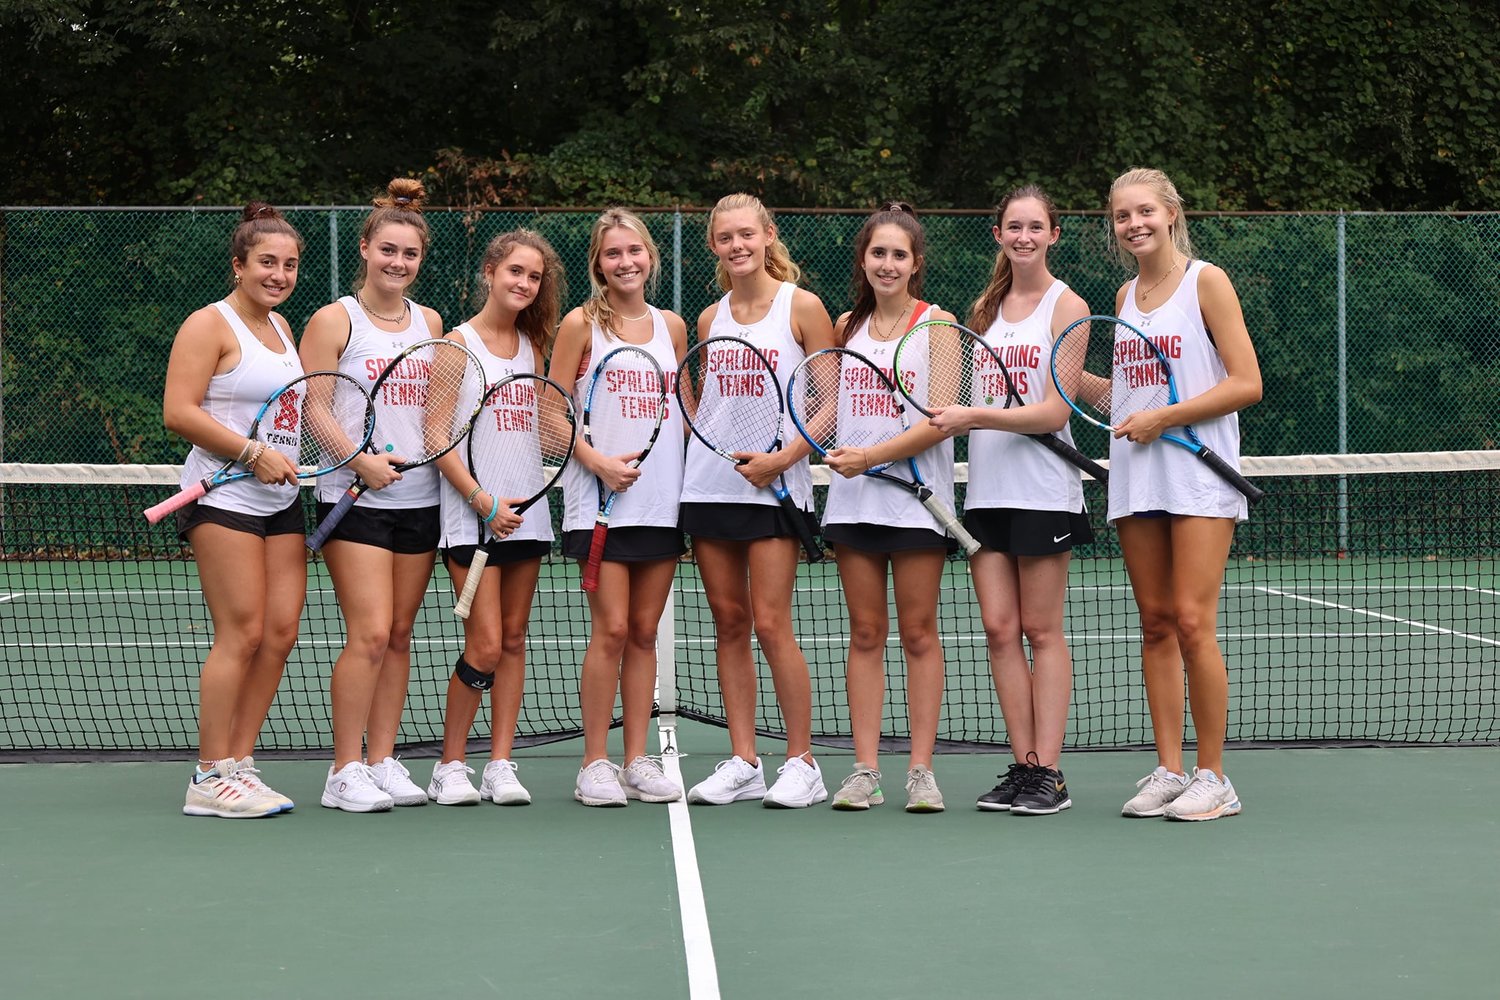 The Archbishop Spalding tennis team won the program’s second B Conference championship in three years.